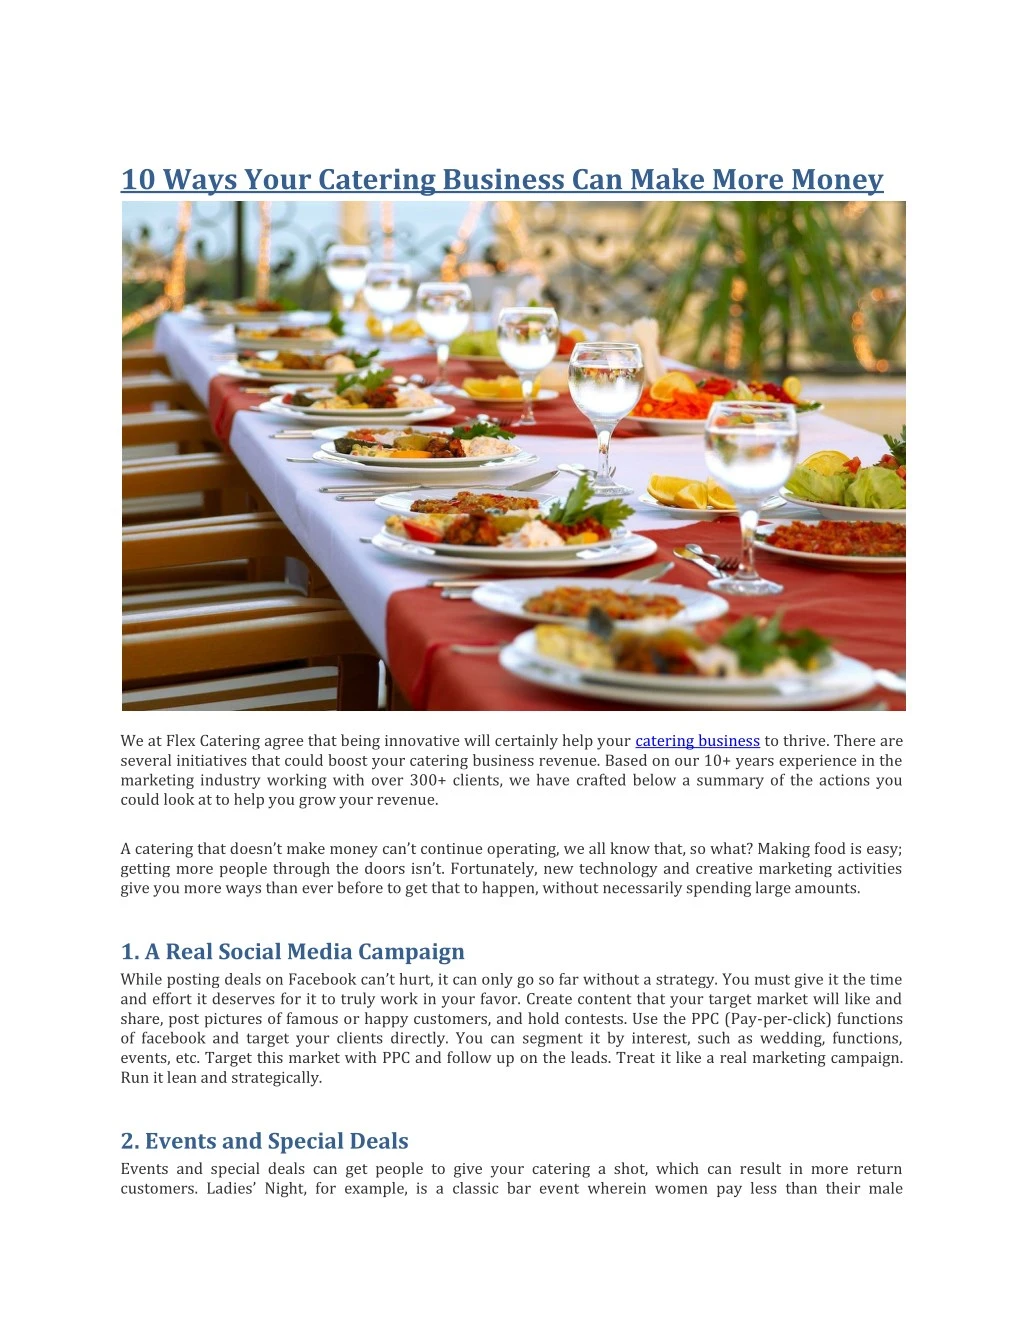 how to make money in catering business